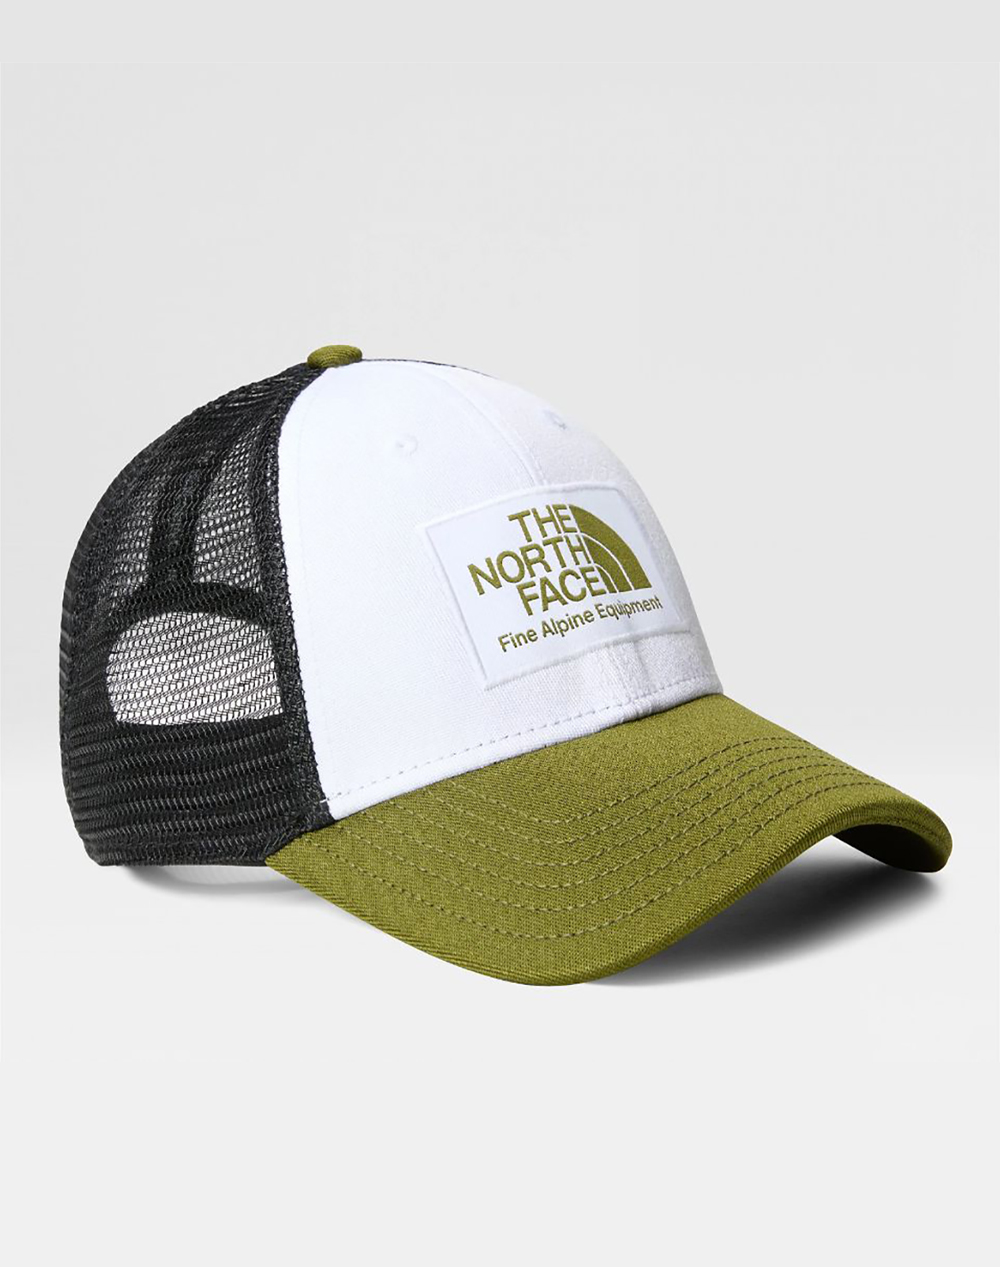 THE NORTH FACE MUDDER TRUCKER NF0A5FXA-NFZIV Olive 3820ATNFA5700006_XR29612